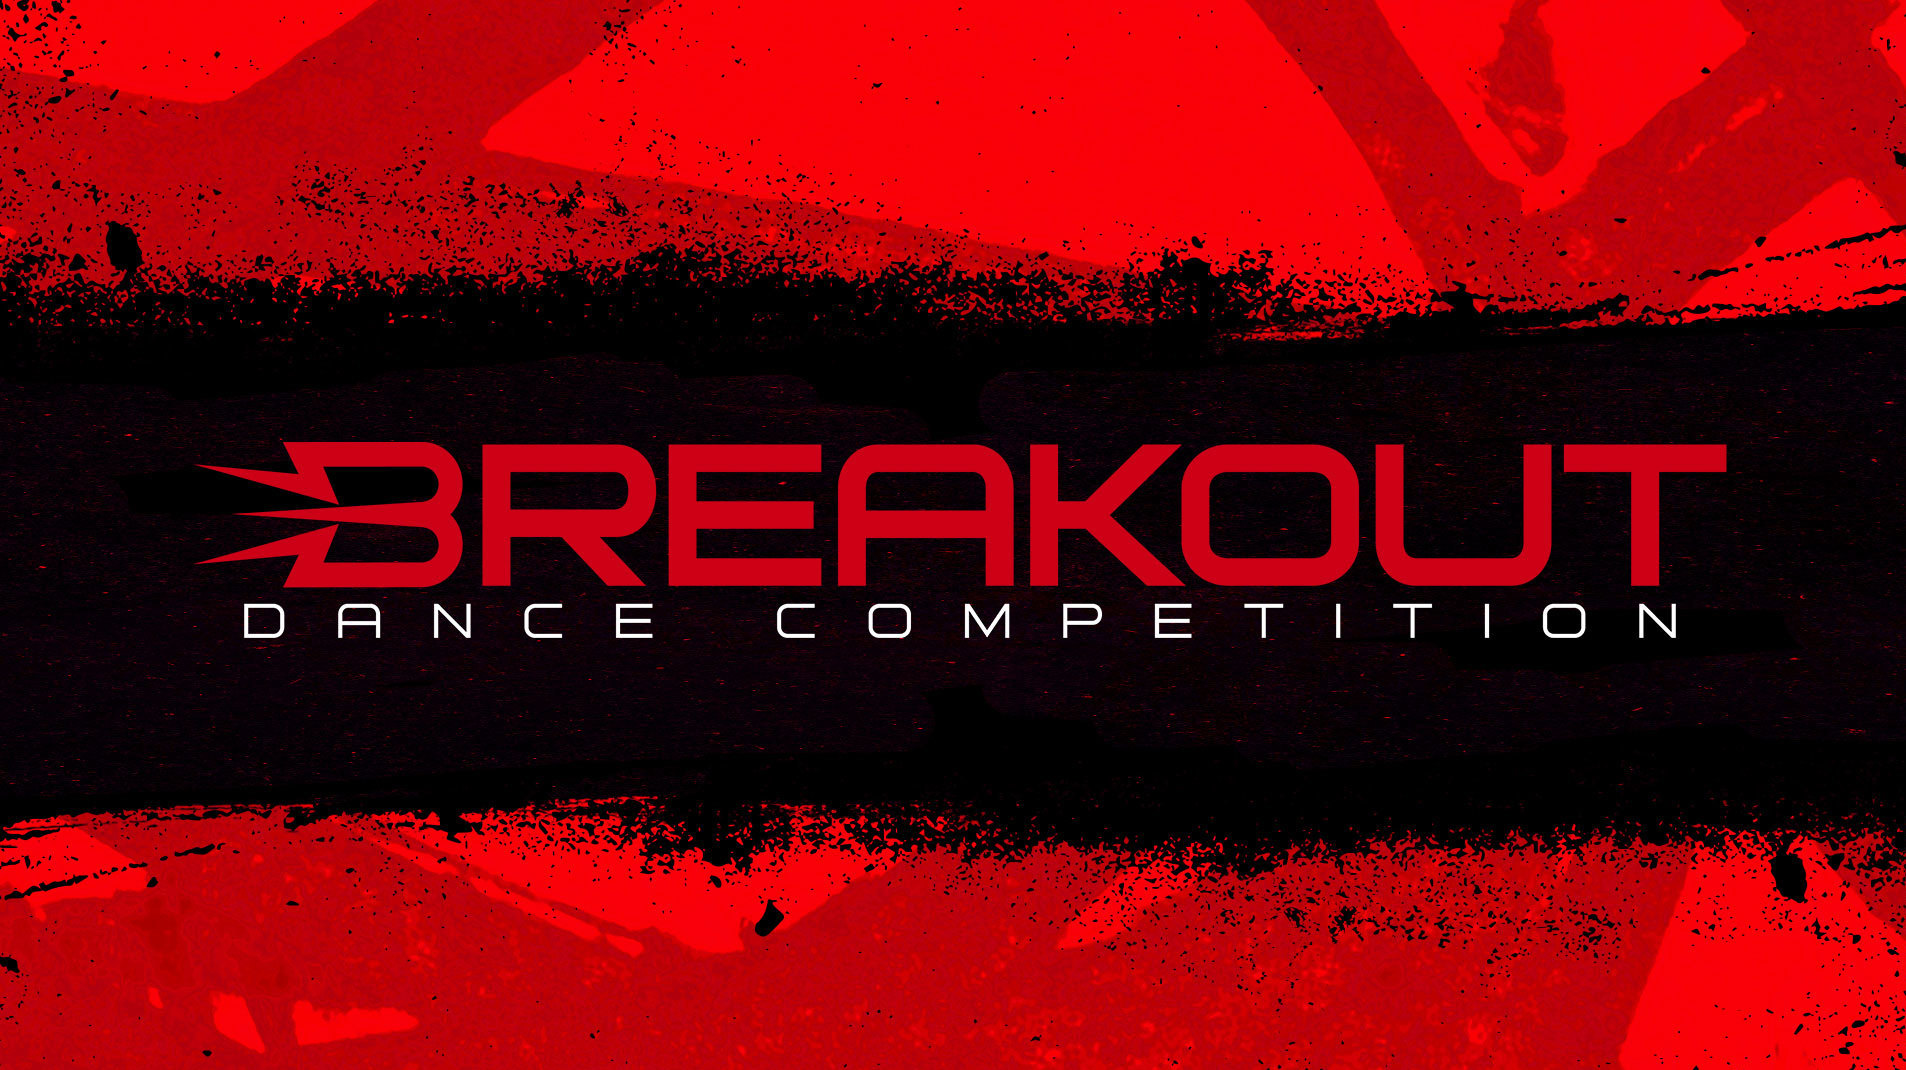 BTS Breakout Dance Competition on Livestream